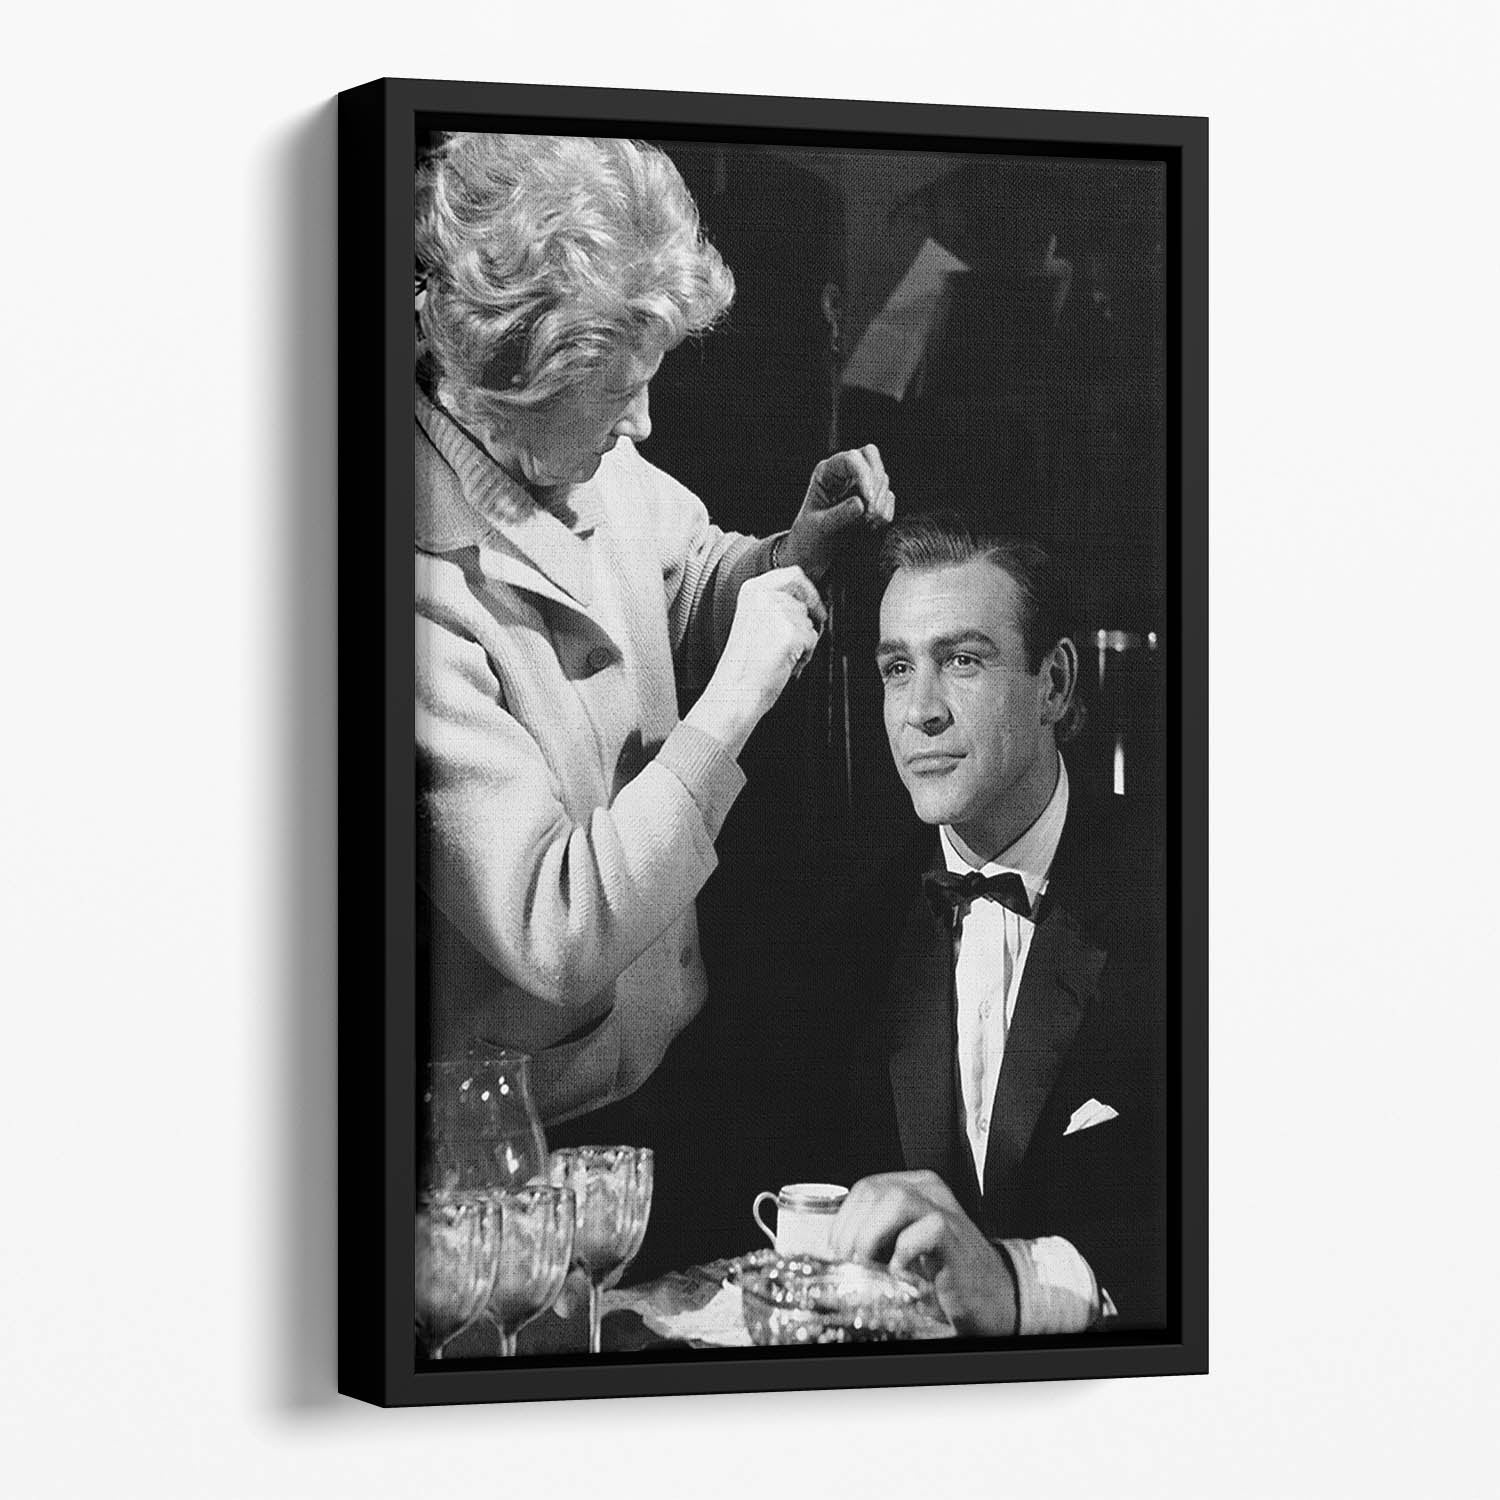 Sean Connery on set 1964 Floating Framed Canvas